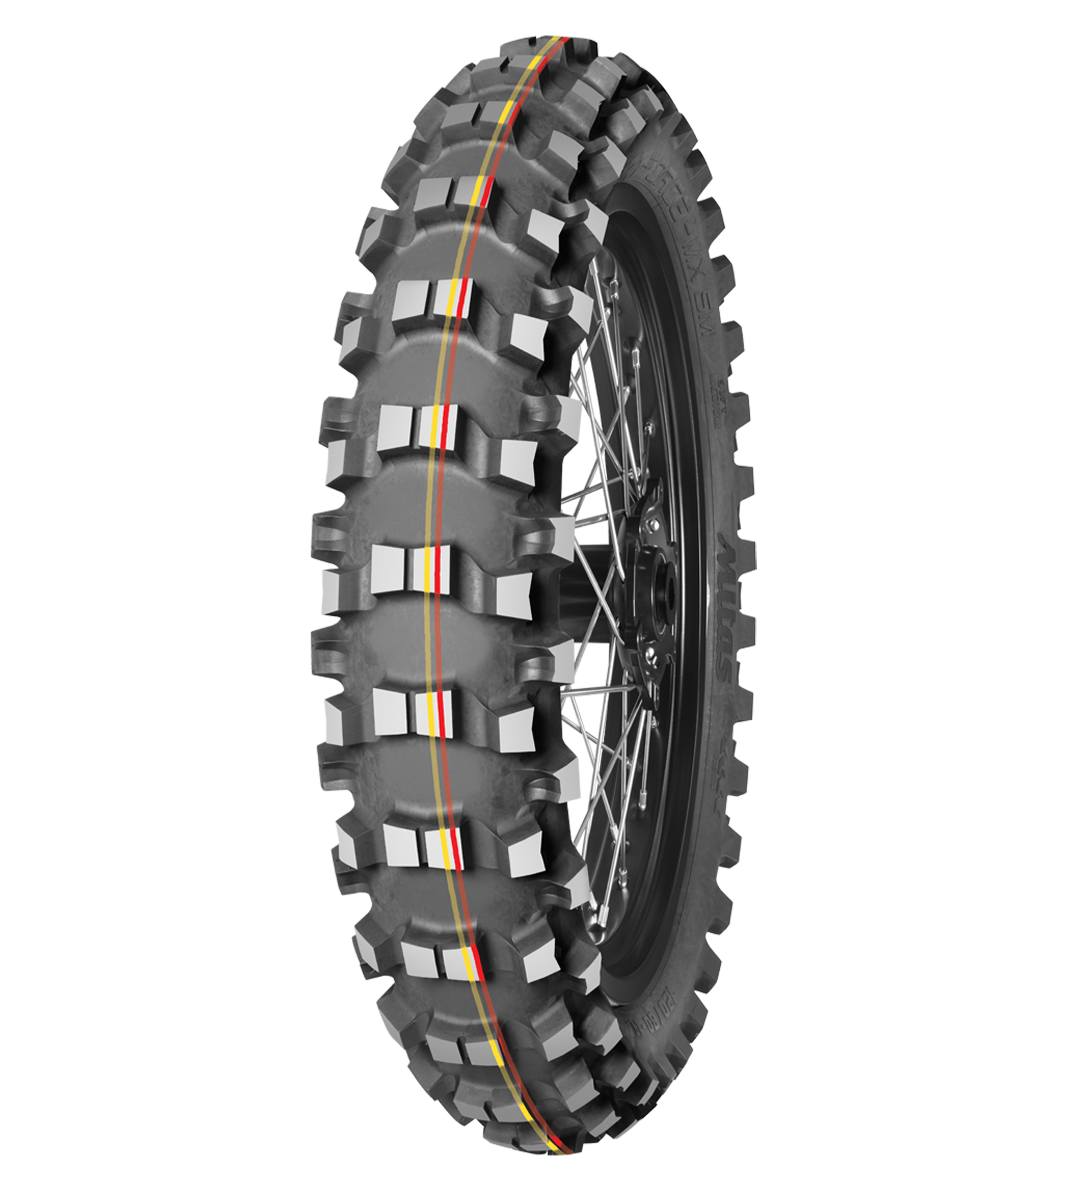 Mitas TERRA FORCE-MX SM 70/100-10 Motocross Competition Off-Road SOFT TO MEDIUM 41J Red & Yellow Tube Rear Tire, 226150, 70/100-10, Motocross, Motocross Competition, Off-Road, Rear, Terra Force, Terra Force-MX SM, Trail, Tires - Imported and distributed in North & South America by Lindeco Genuine Powersports - Premier Powersports Equipment and Accessories for Motorcycle Enthusiasts, Professional Riders and Dealers.